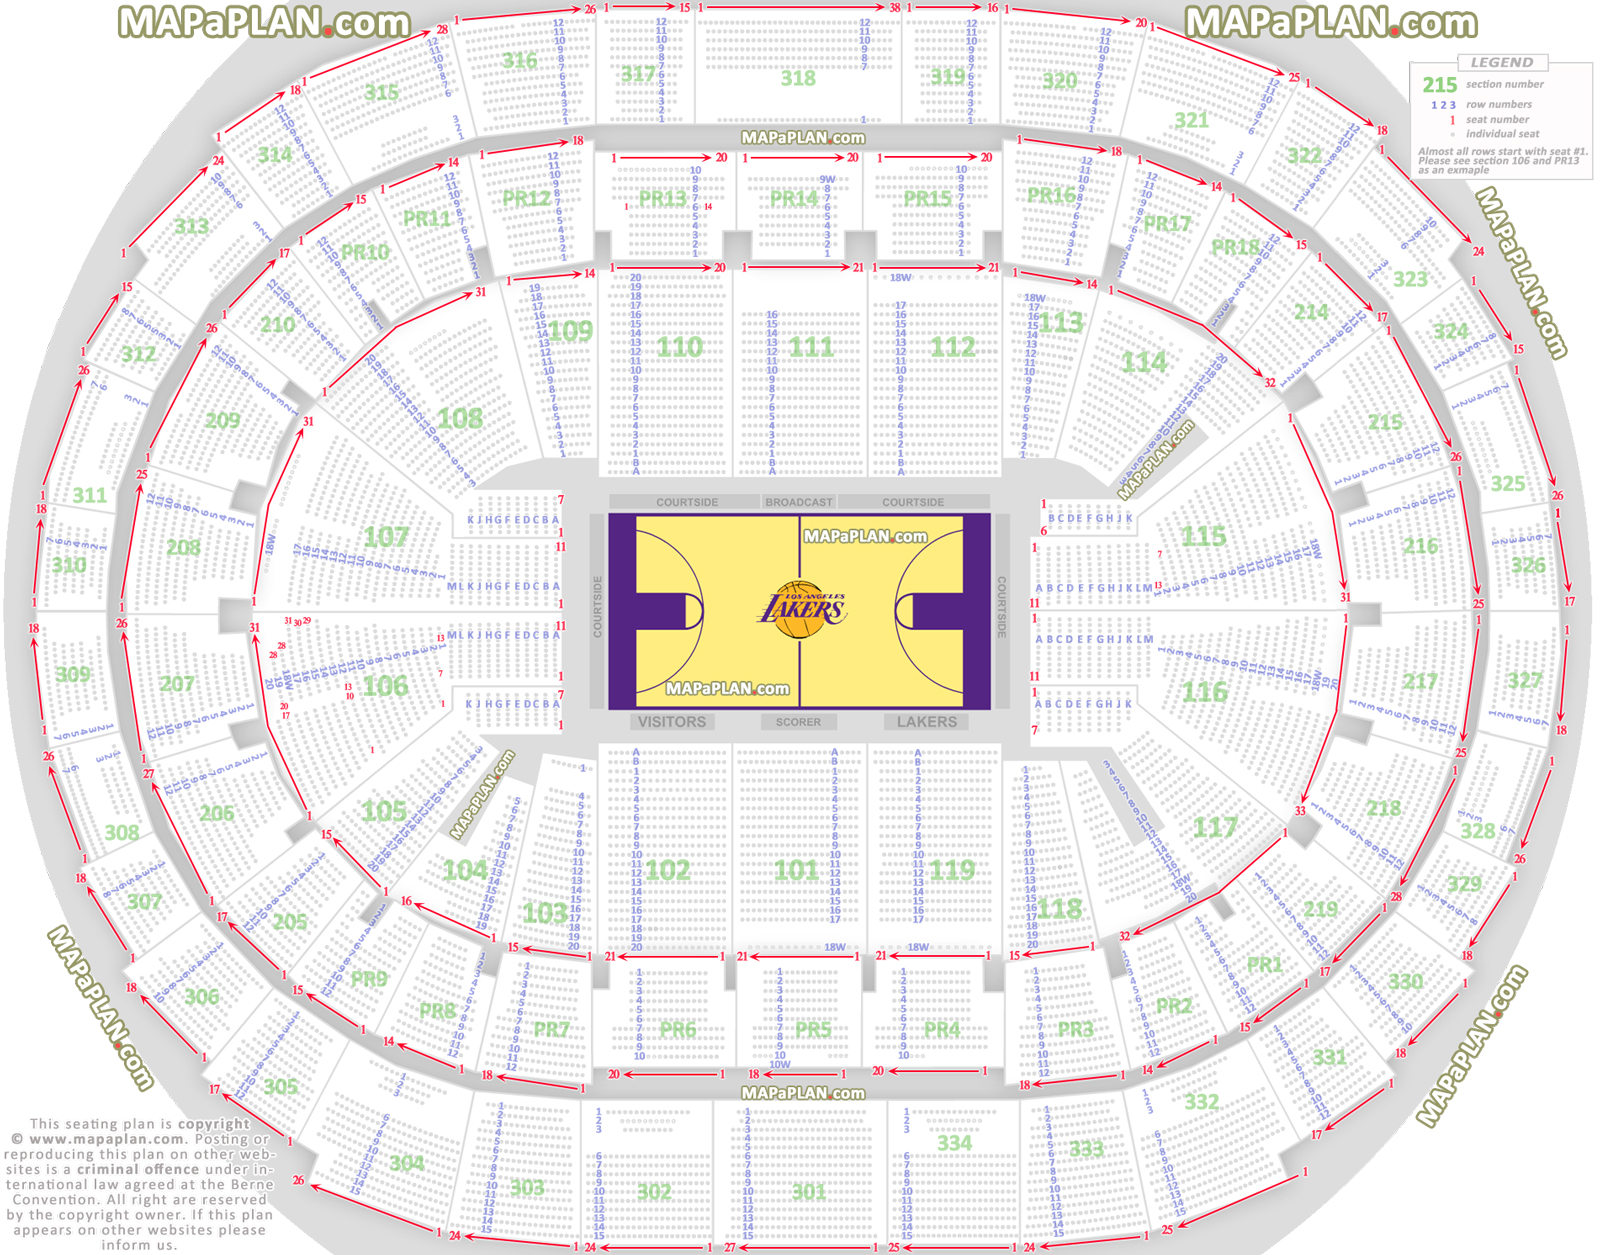 Staples Center seat numbers detailed seating chart - LA ...